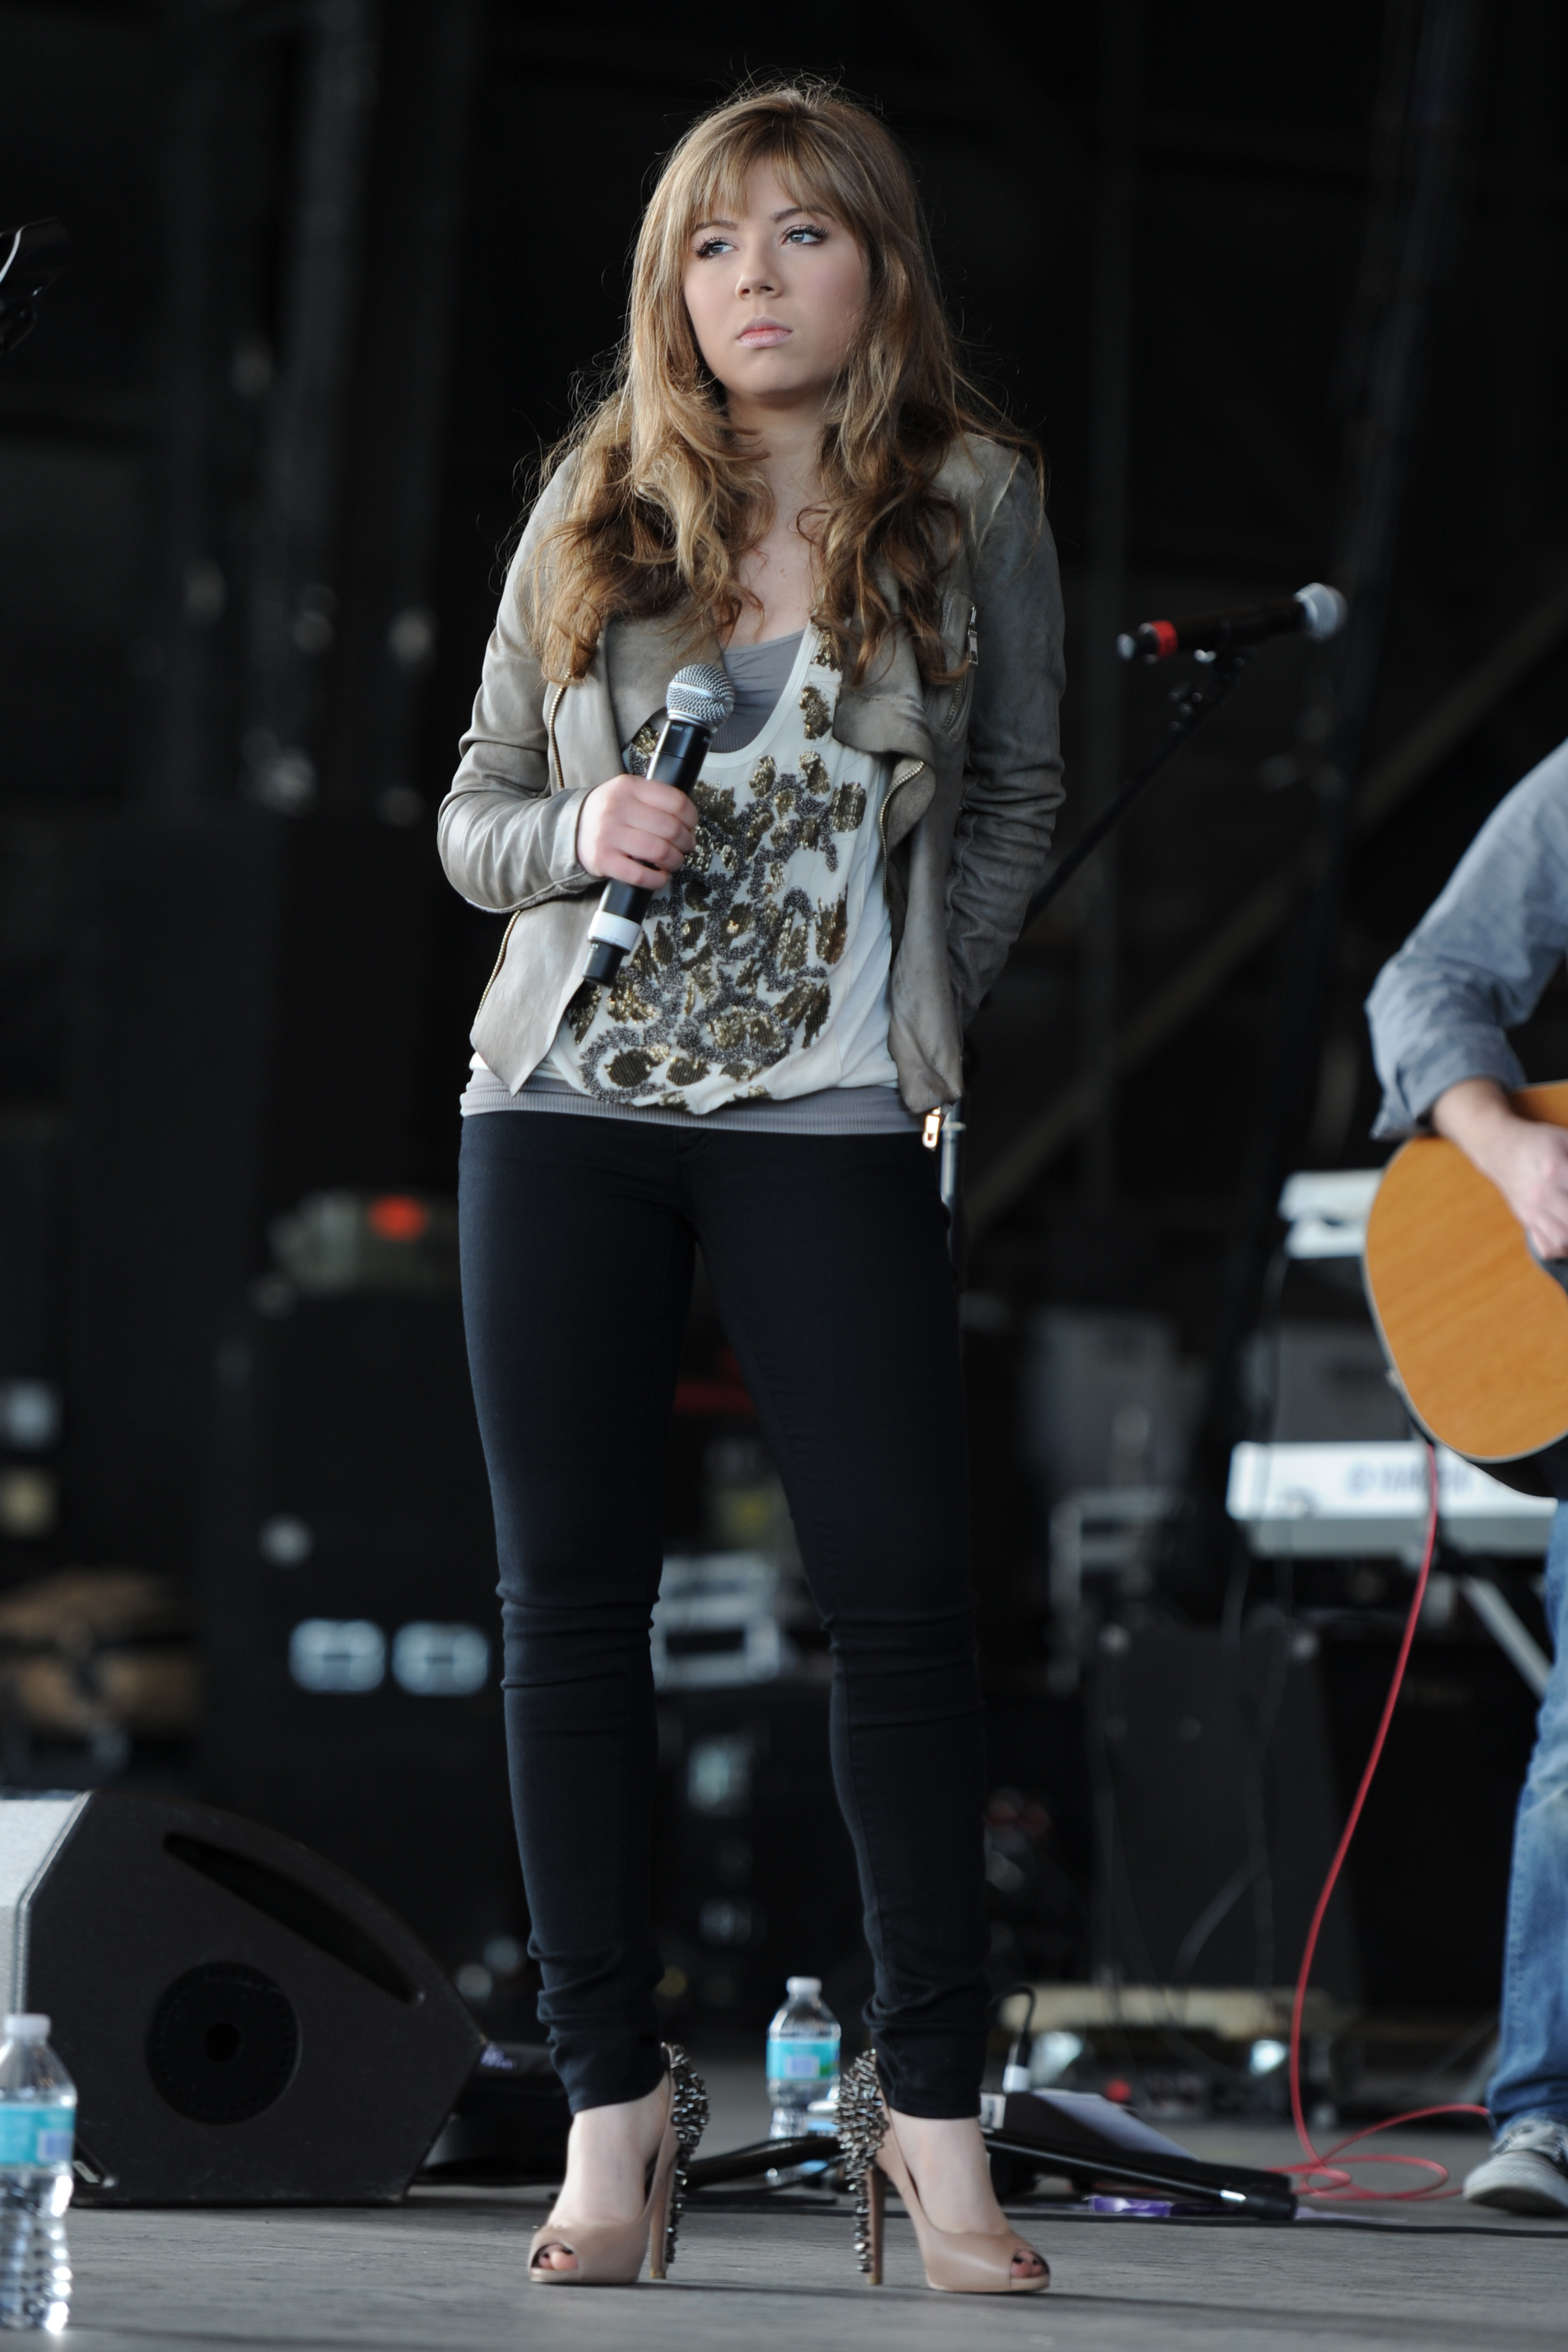 Jennette McCurdy onstage